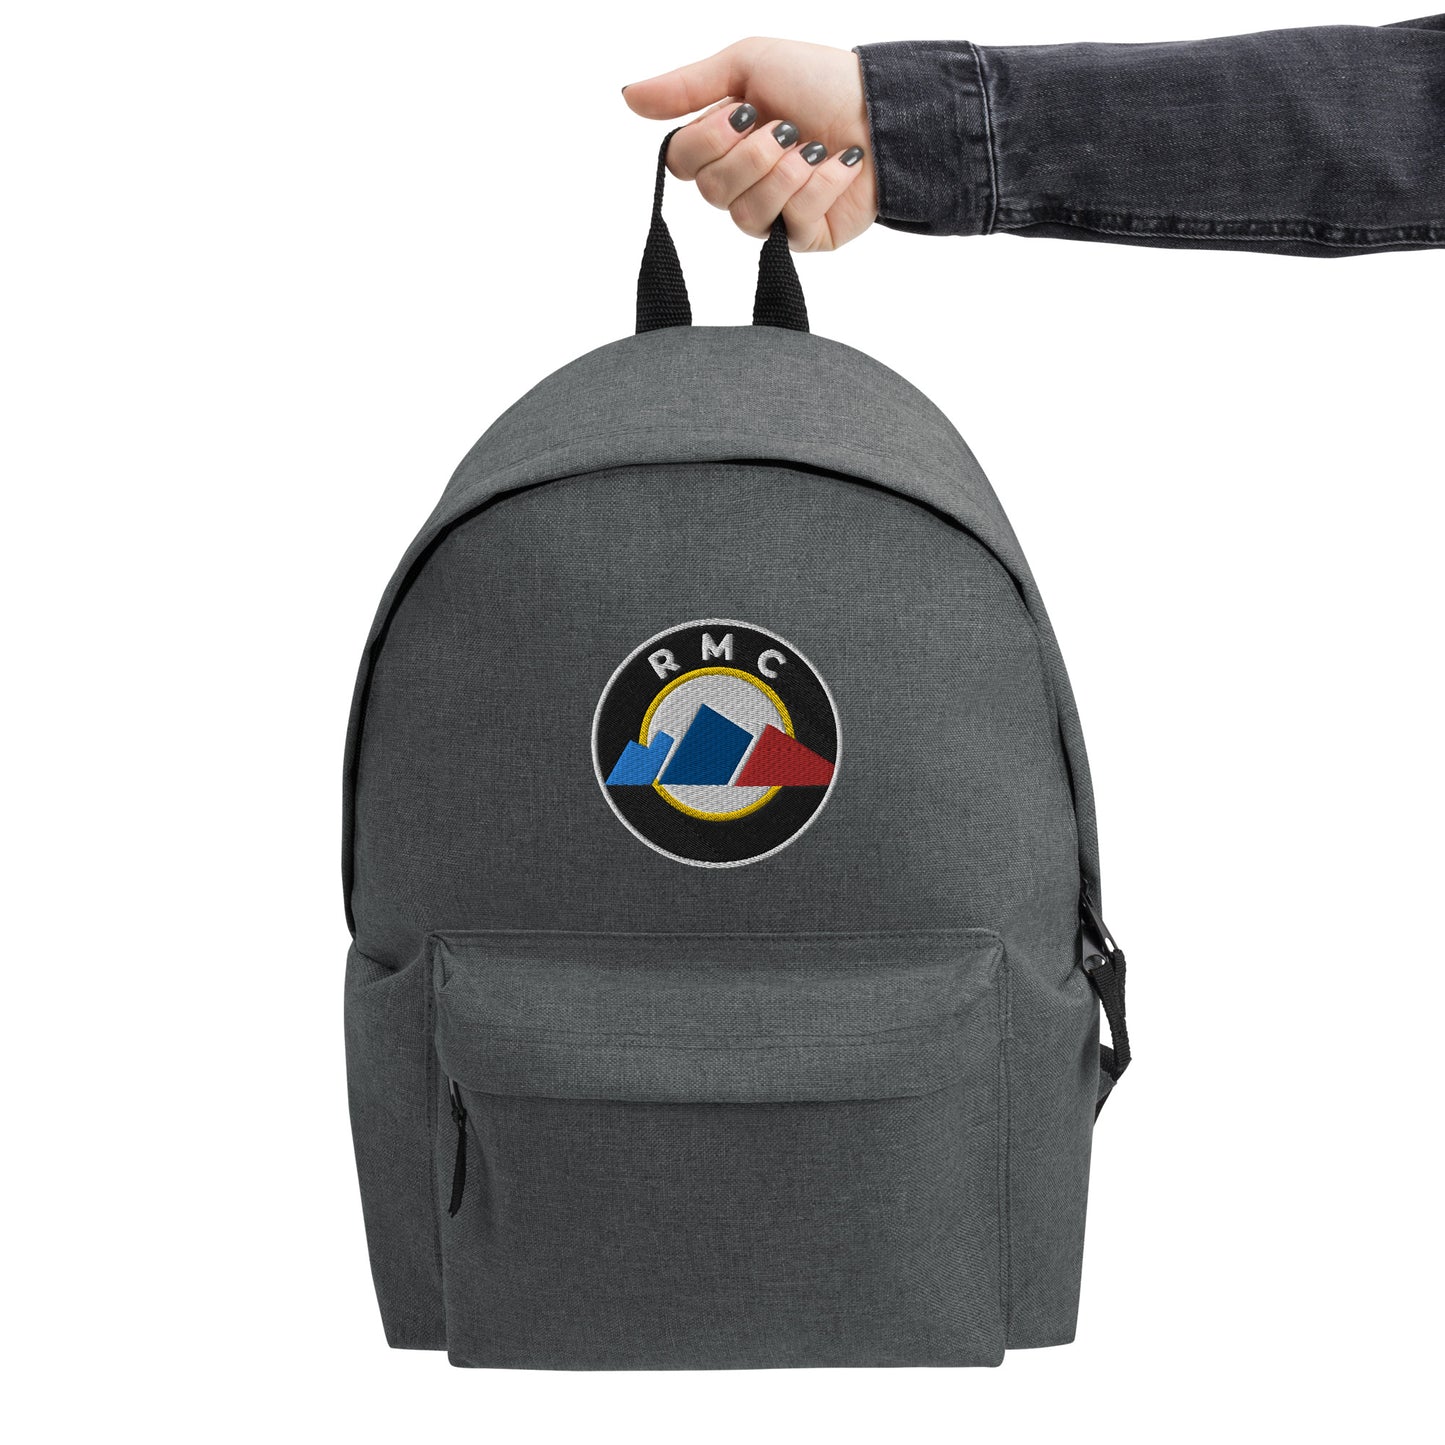 RMC Roundel Embroidered Backpack